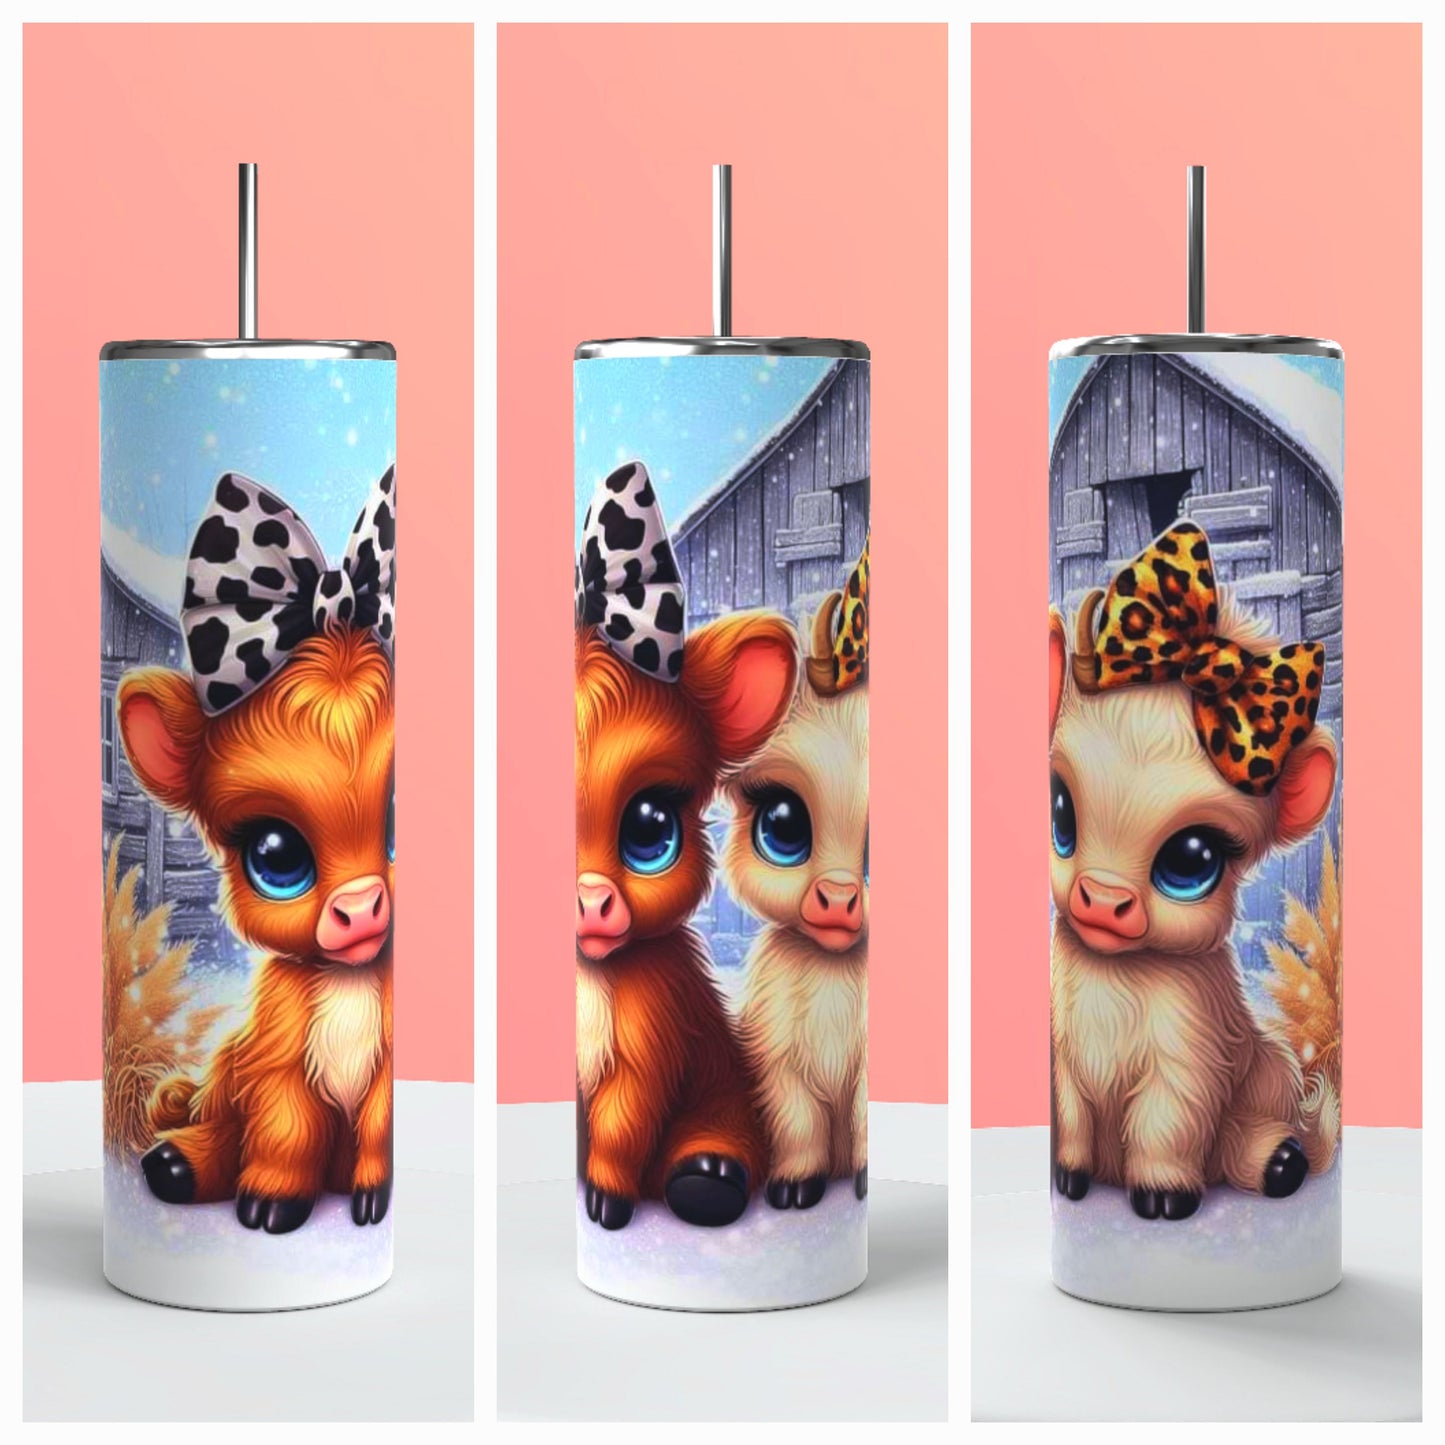 Baby cows with bows tumbler